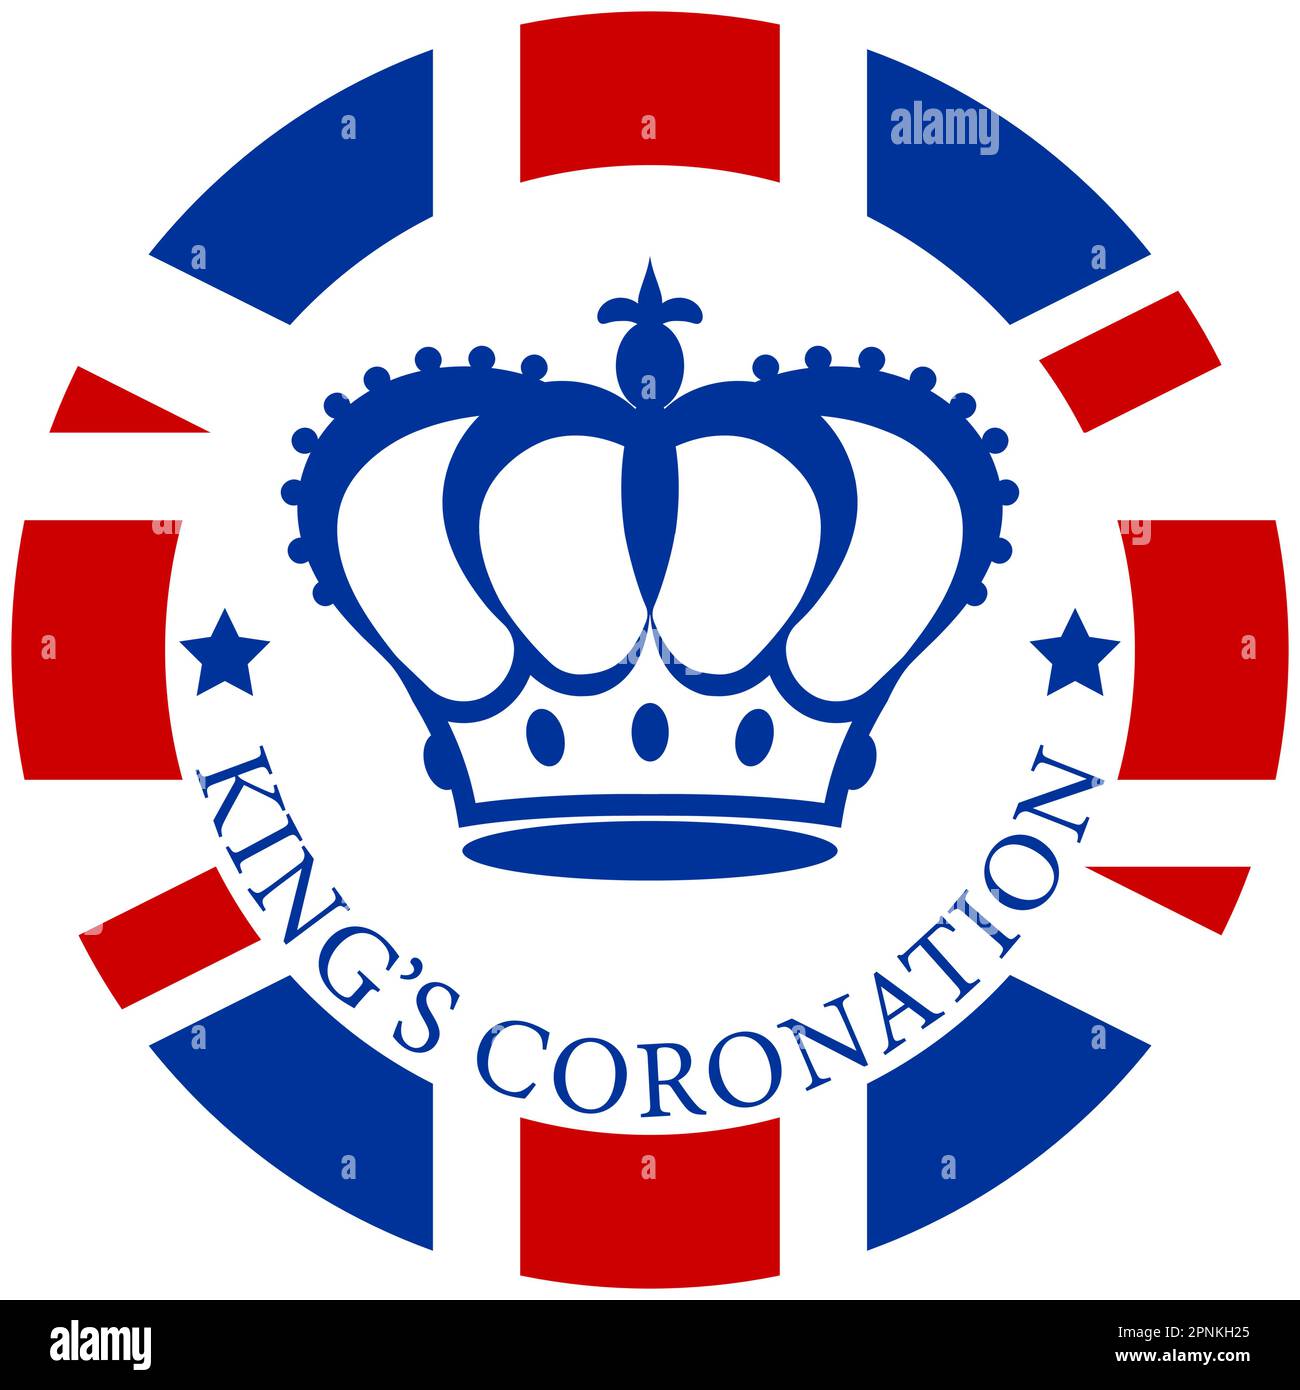 Royal crown in flat style on a round british flag background with text King's coronation. Badge, emblem, logo in honor of the coronation of the new Stock Vector